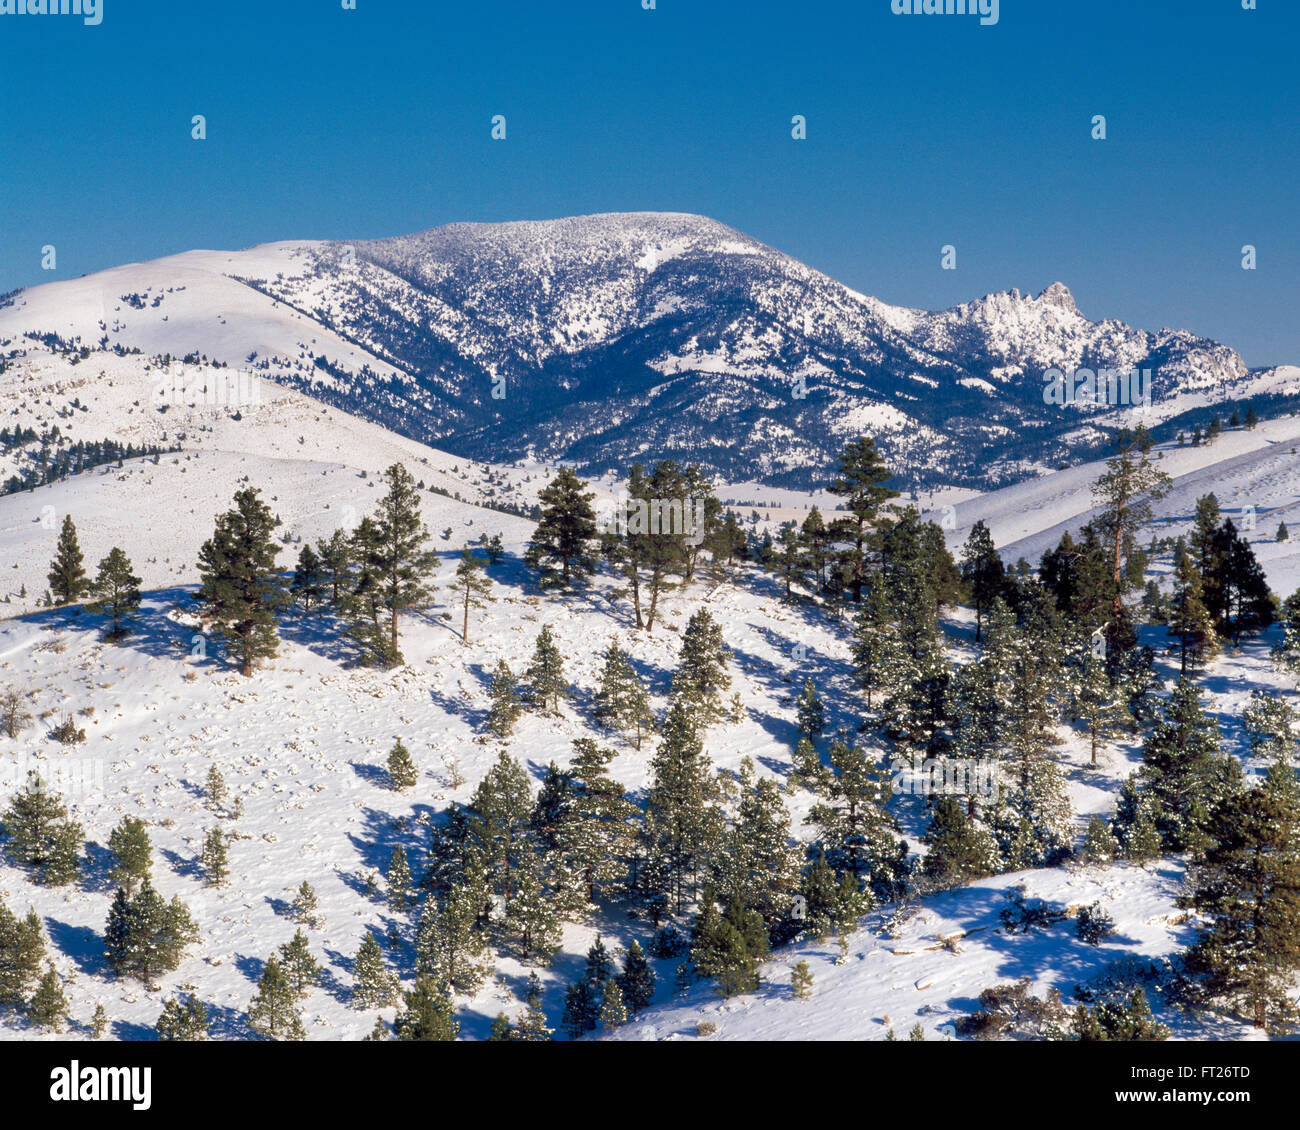 sleeping giant mountain and foothills in winter snow near helena, montana Stock Photo